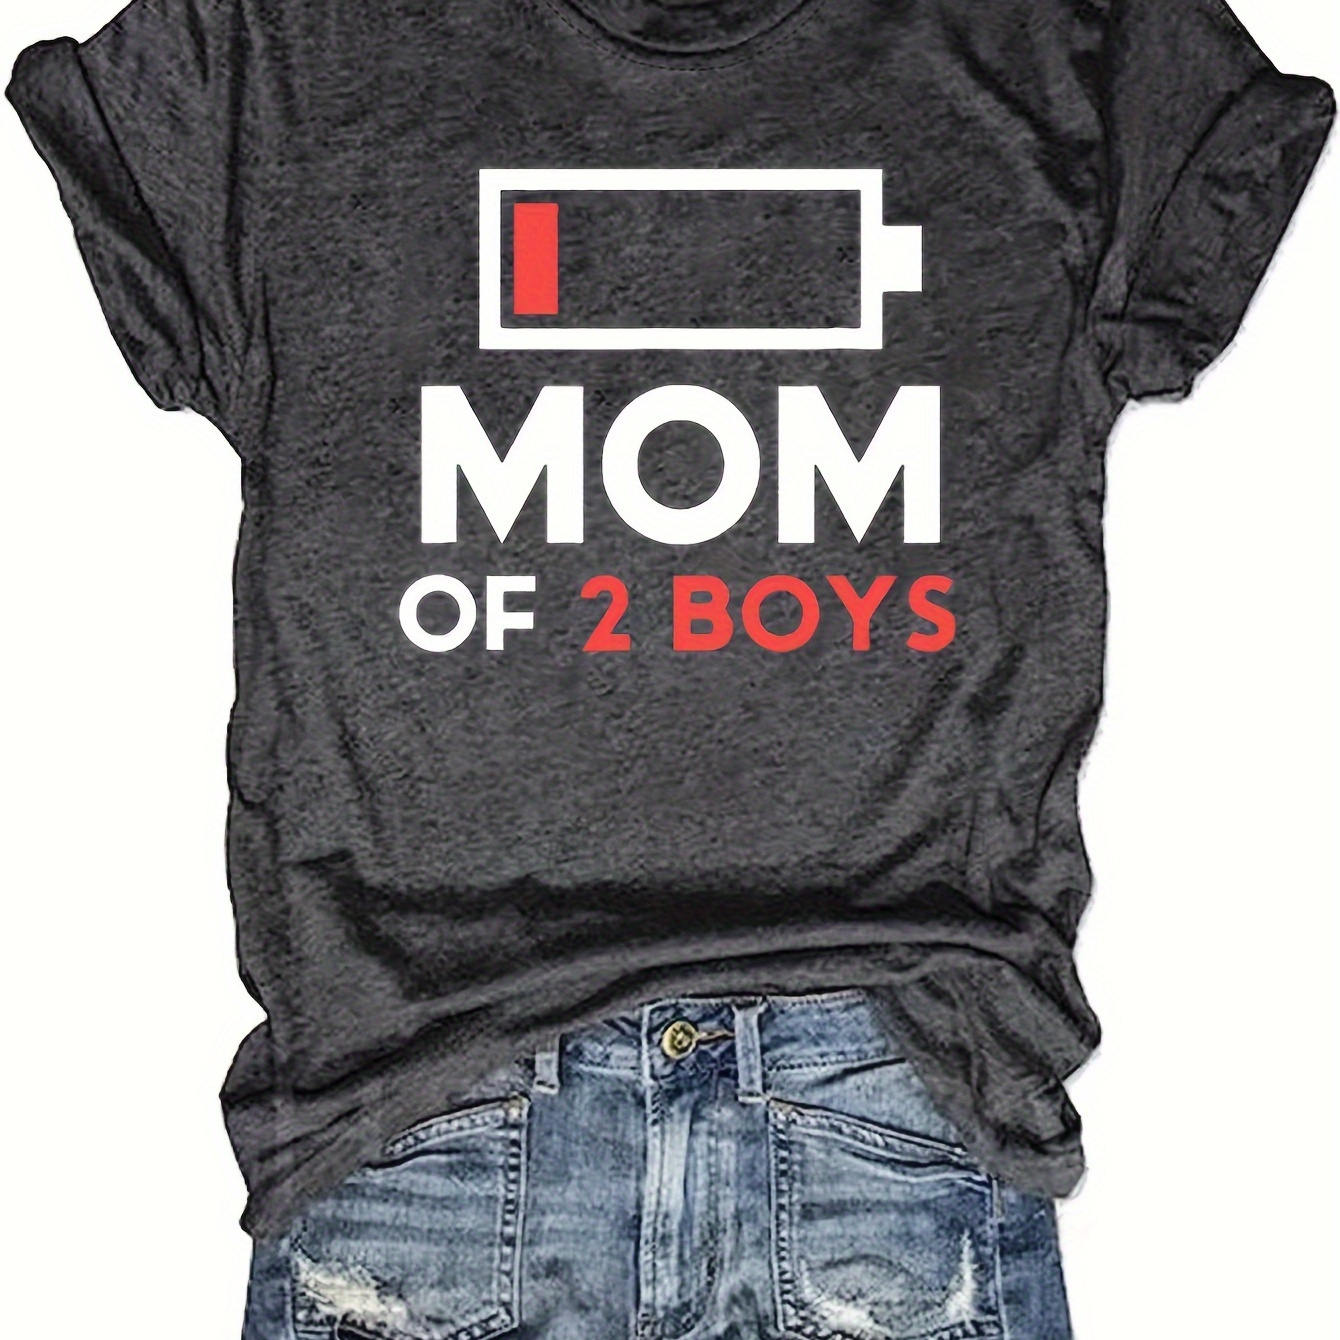 

Mom Of 2 Boys Print T-shirt, Casual Crew Neck Short Sleeve Top For Spring & Summer, Women's Clothing